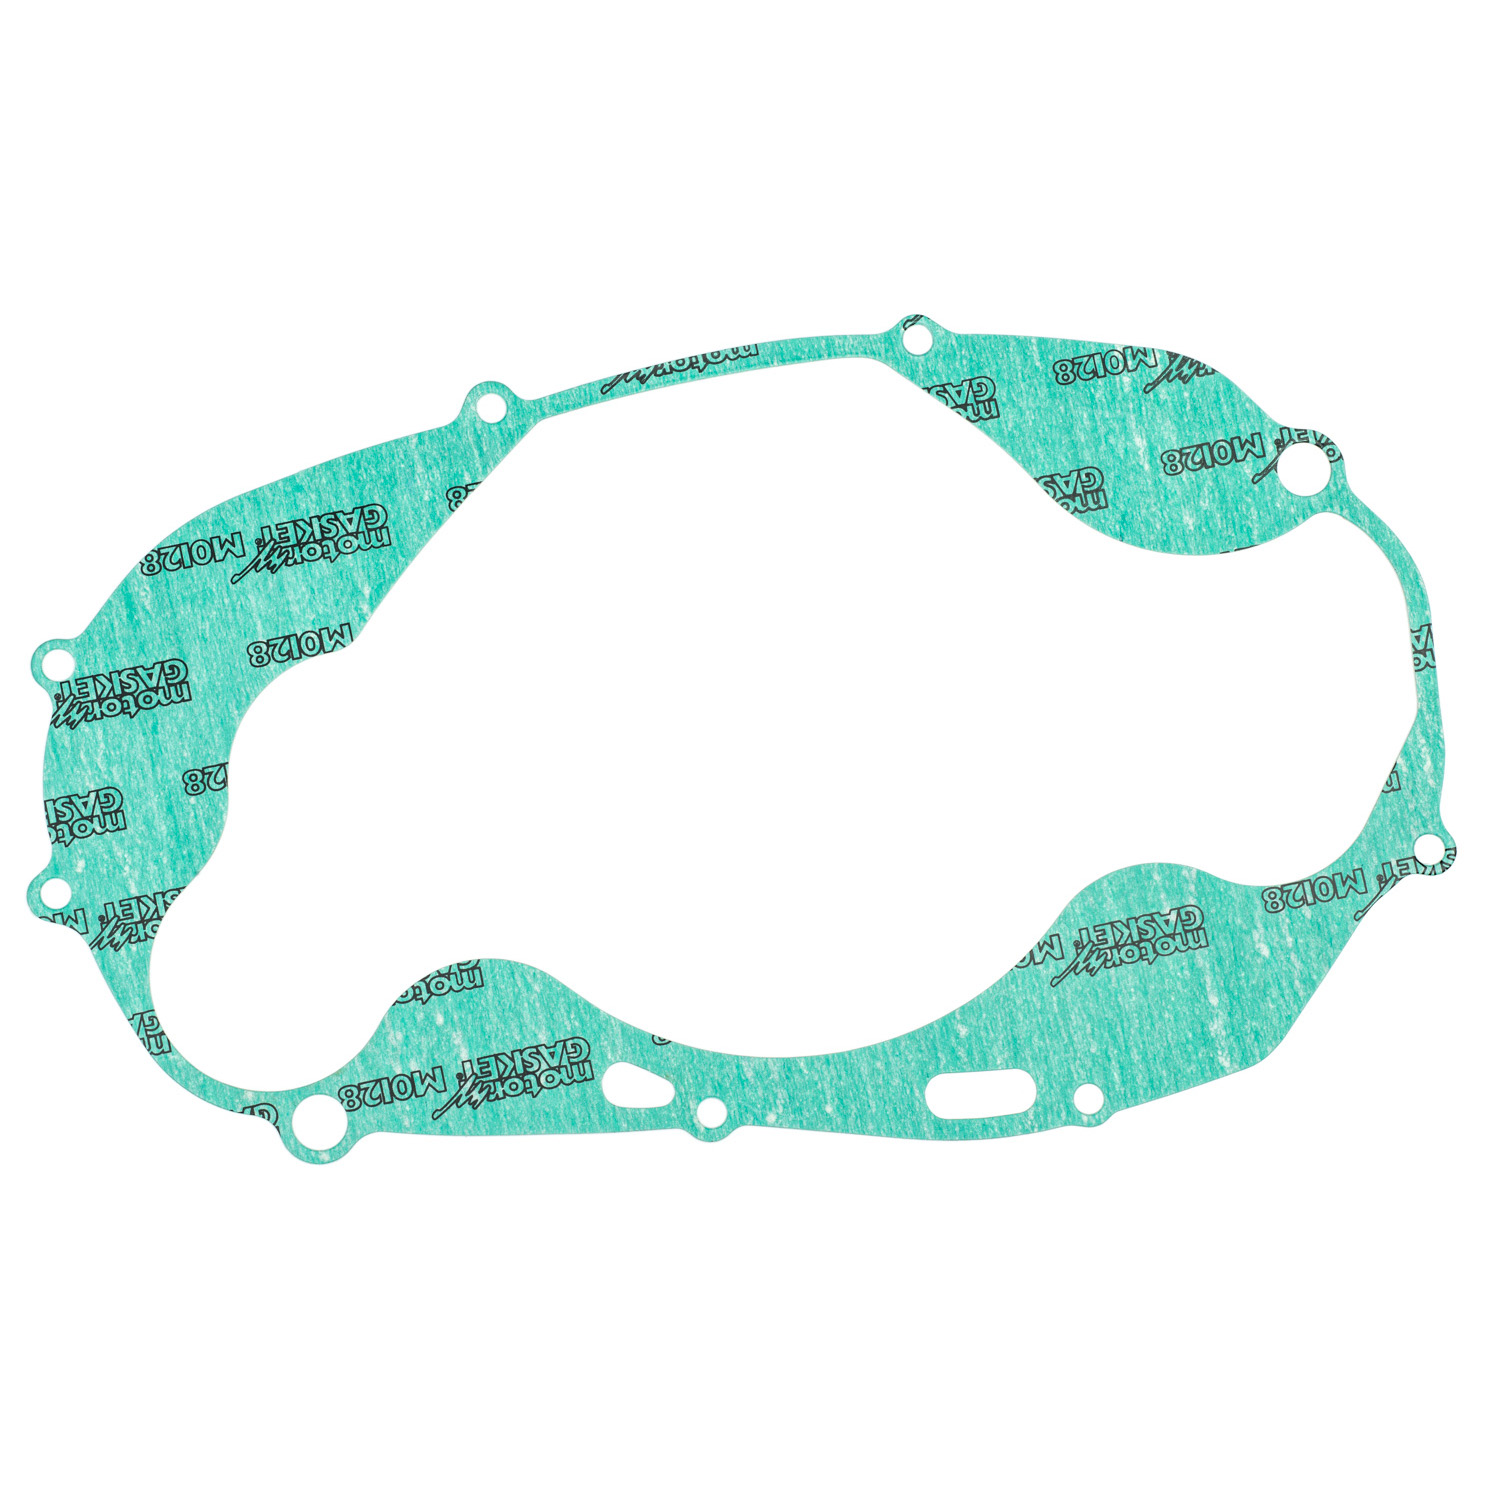 RD400F 1979 Clutch Cover Gasket